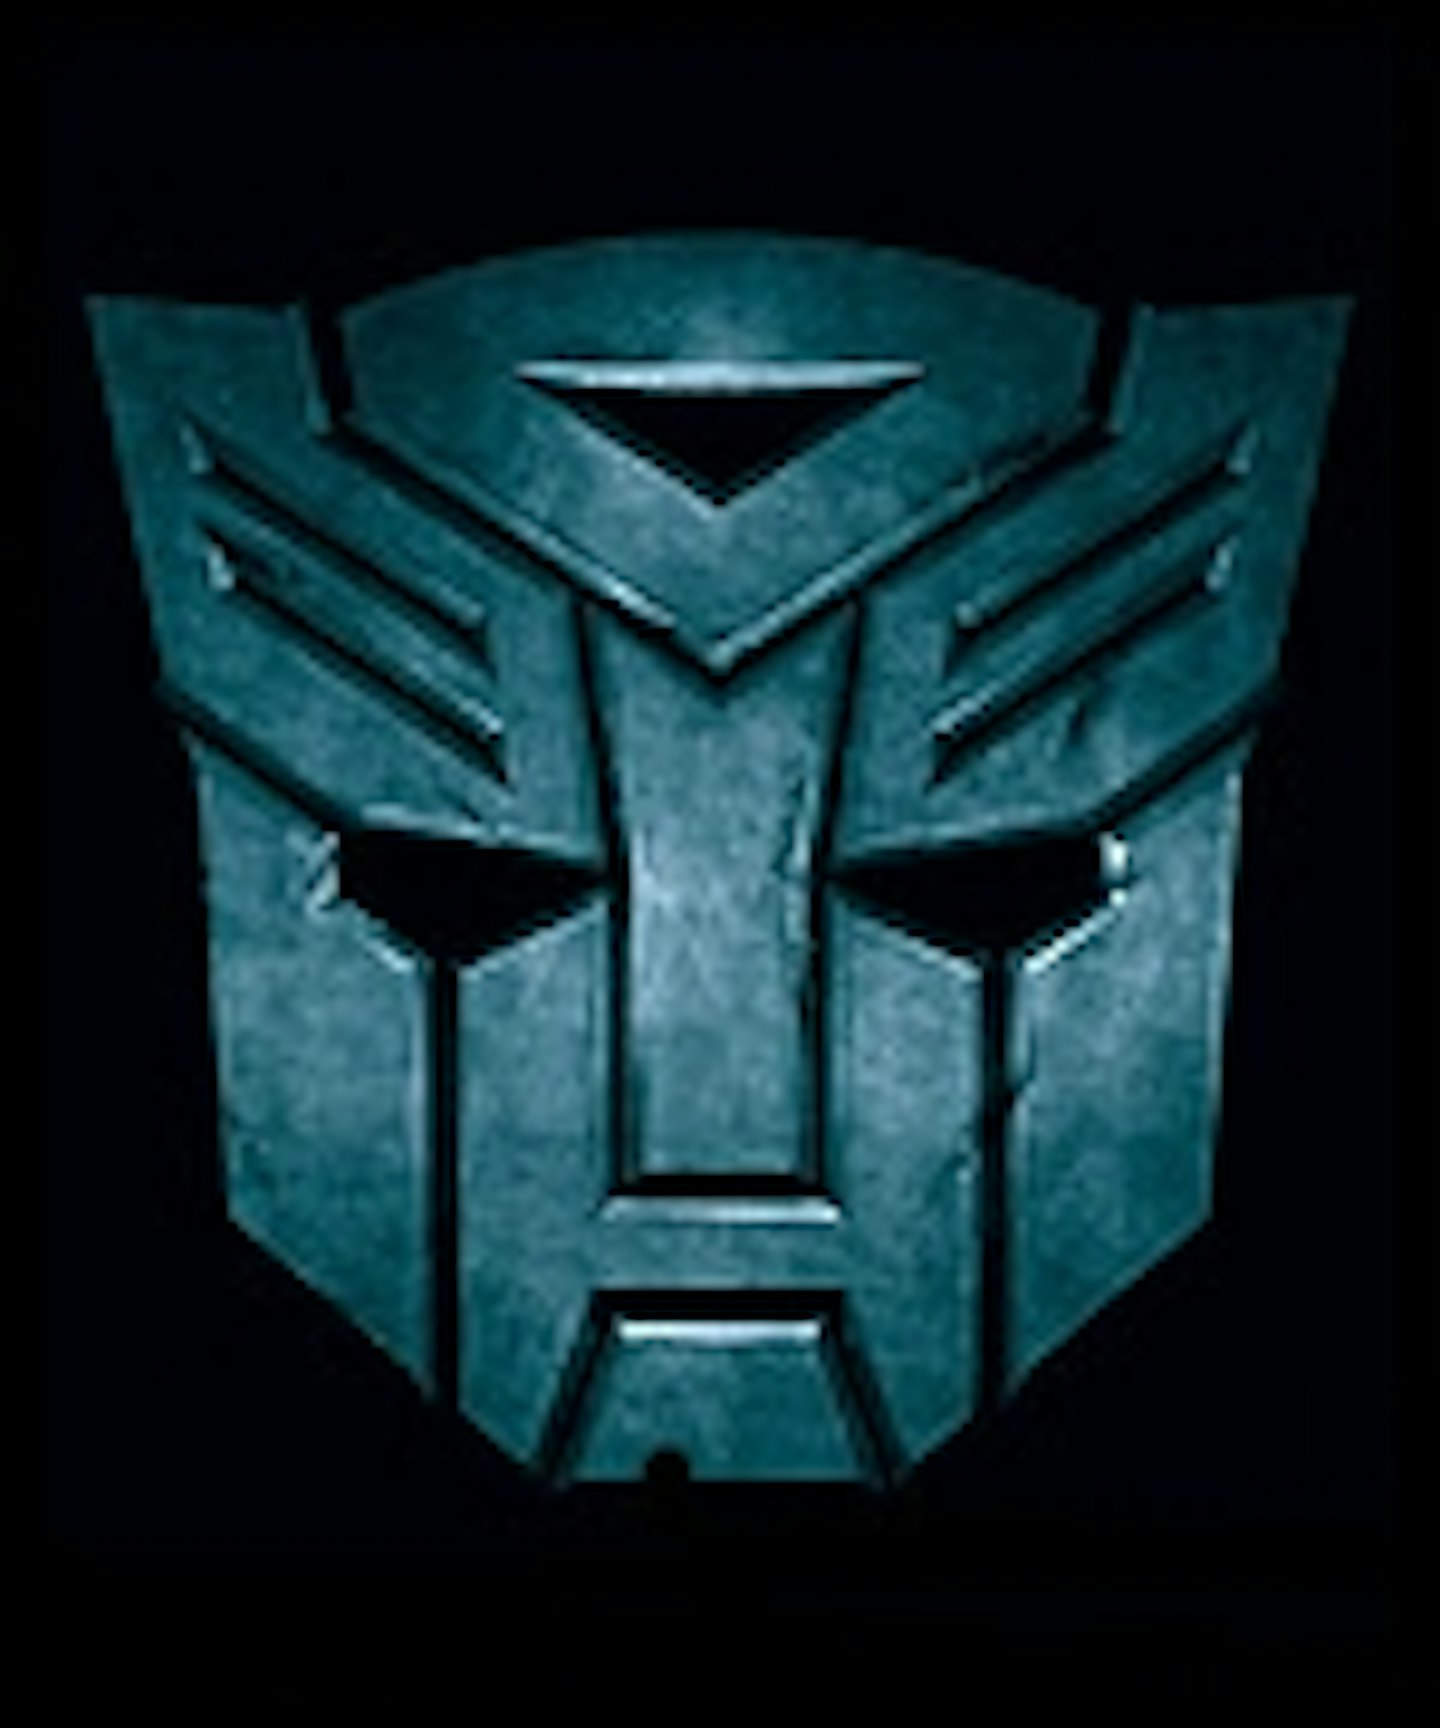 Transformers Writers Face The Fans